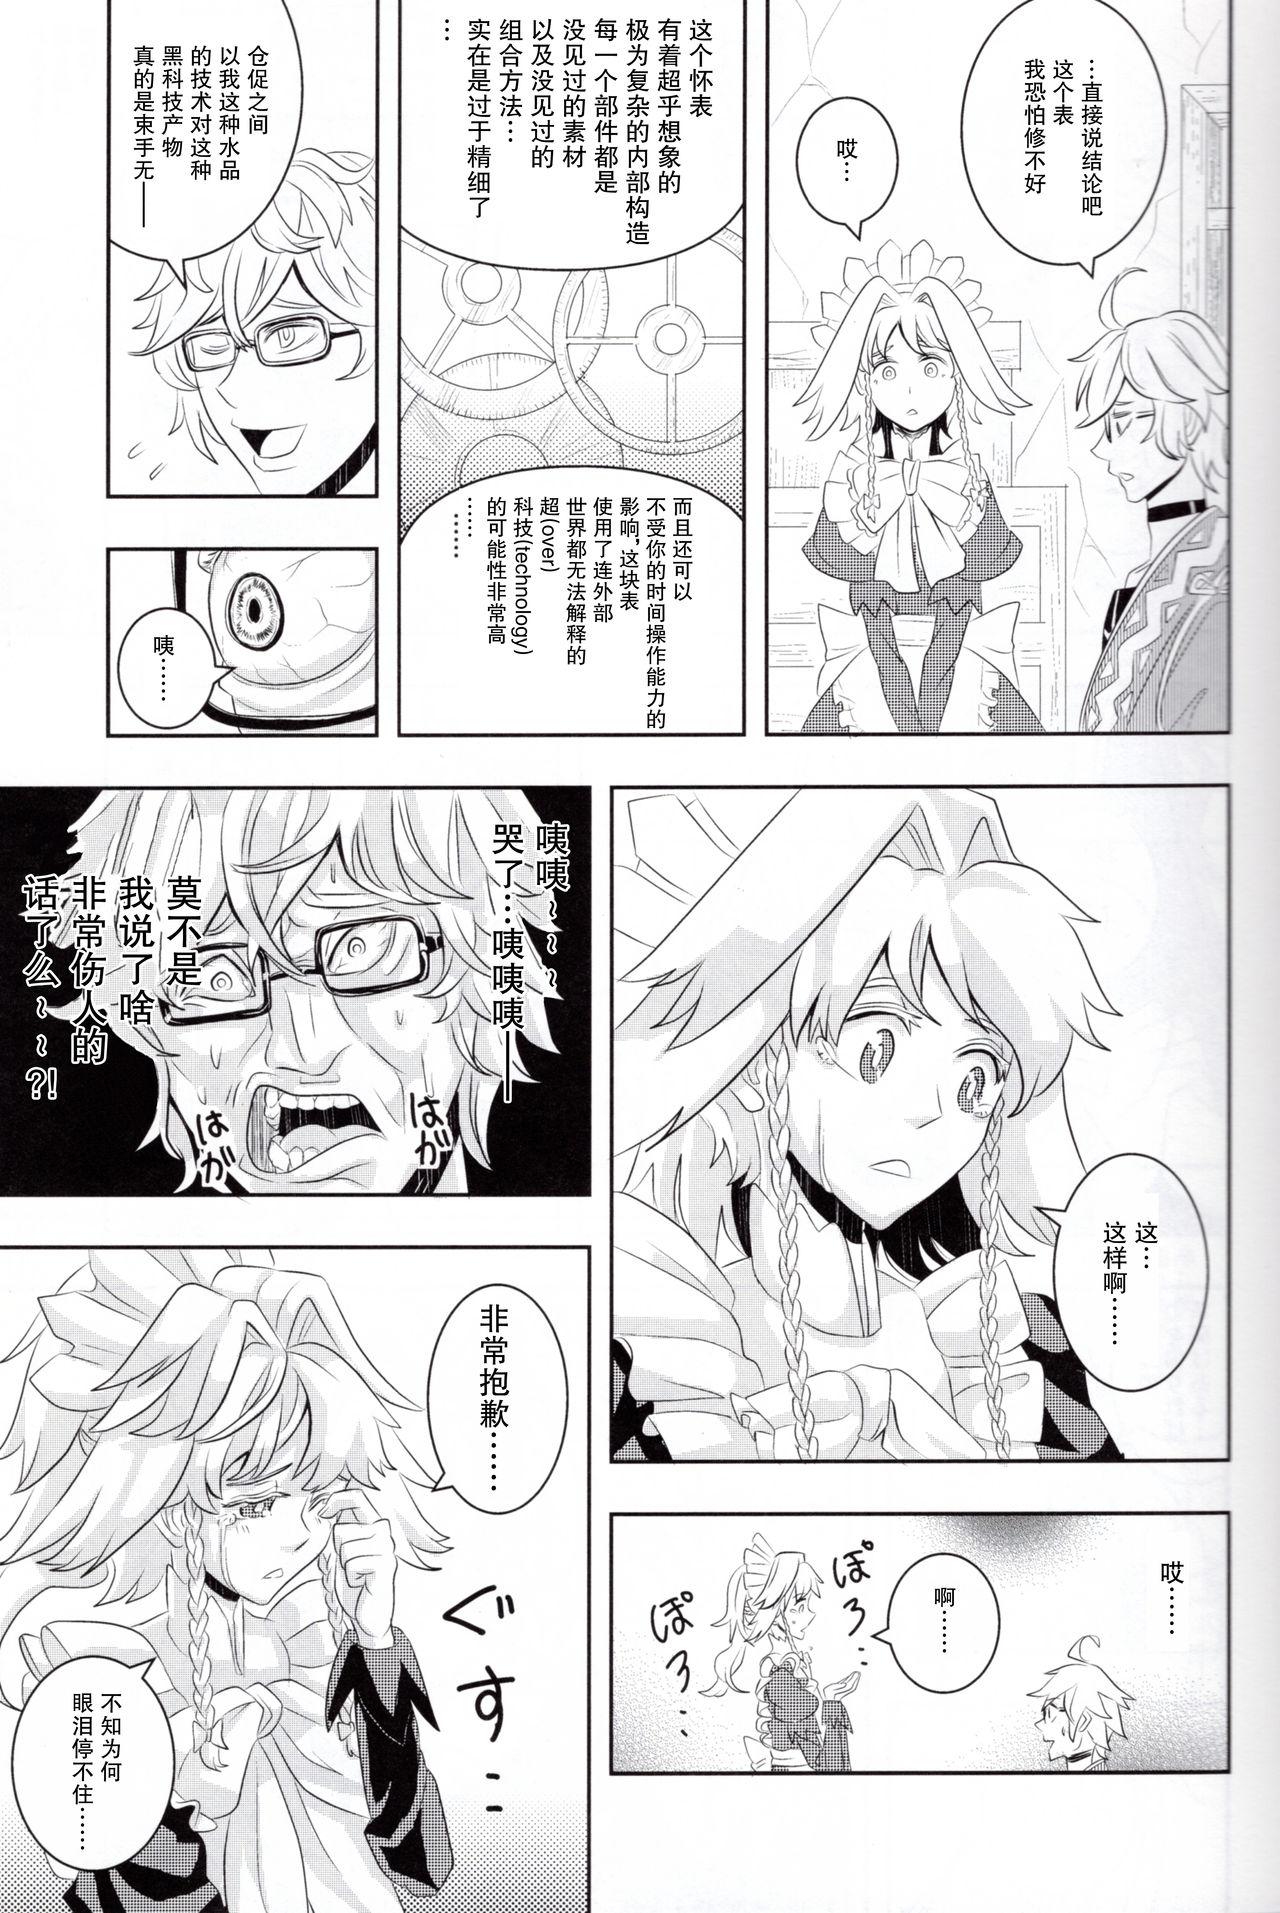 Muscular Maid to Tenshu to Kaichuudokei to - Touhou project Sextape - Page 4